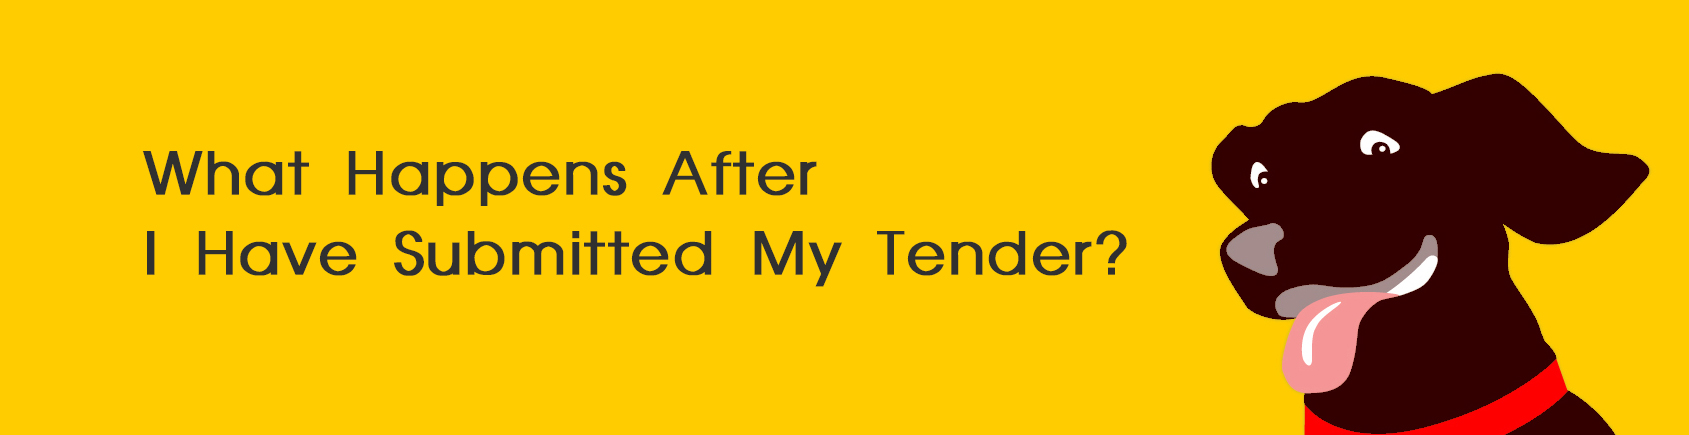 What Happens After the Tender on a house